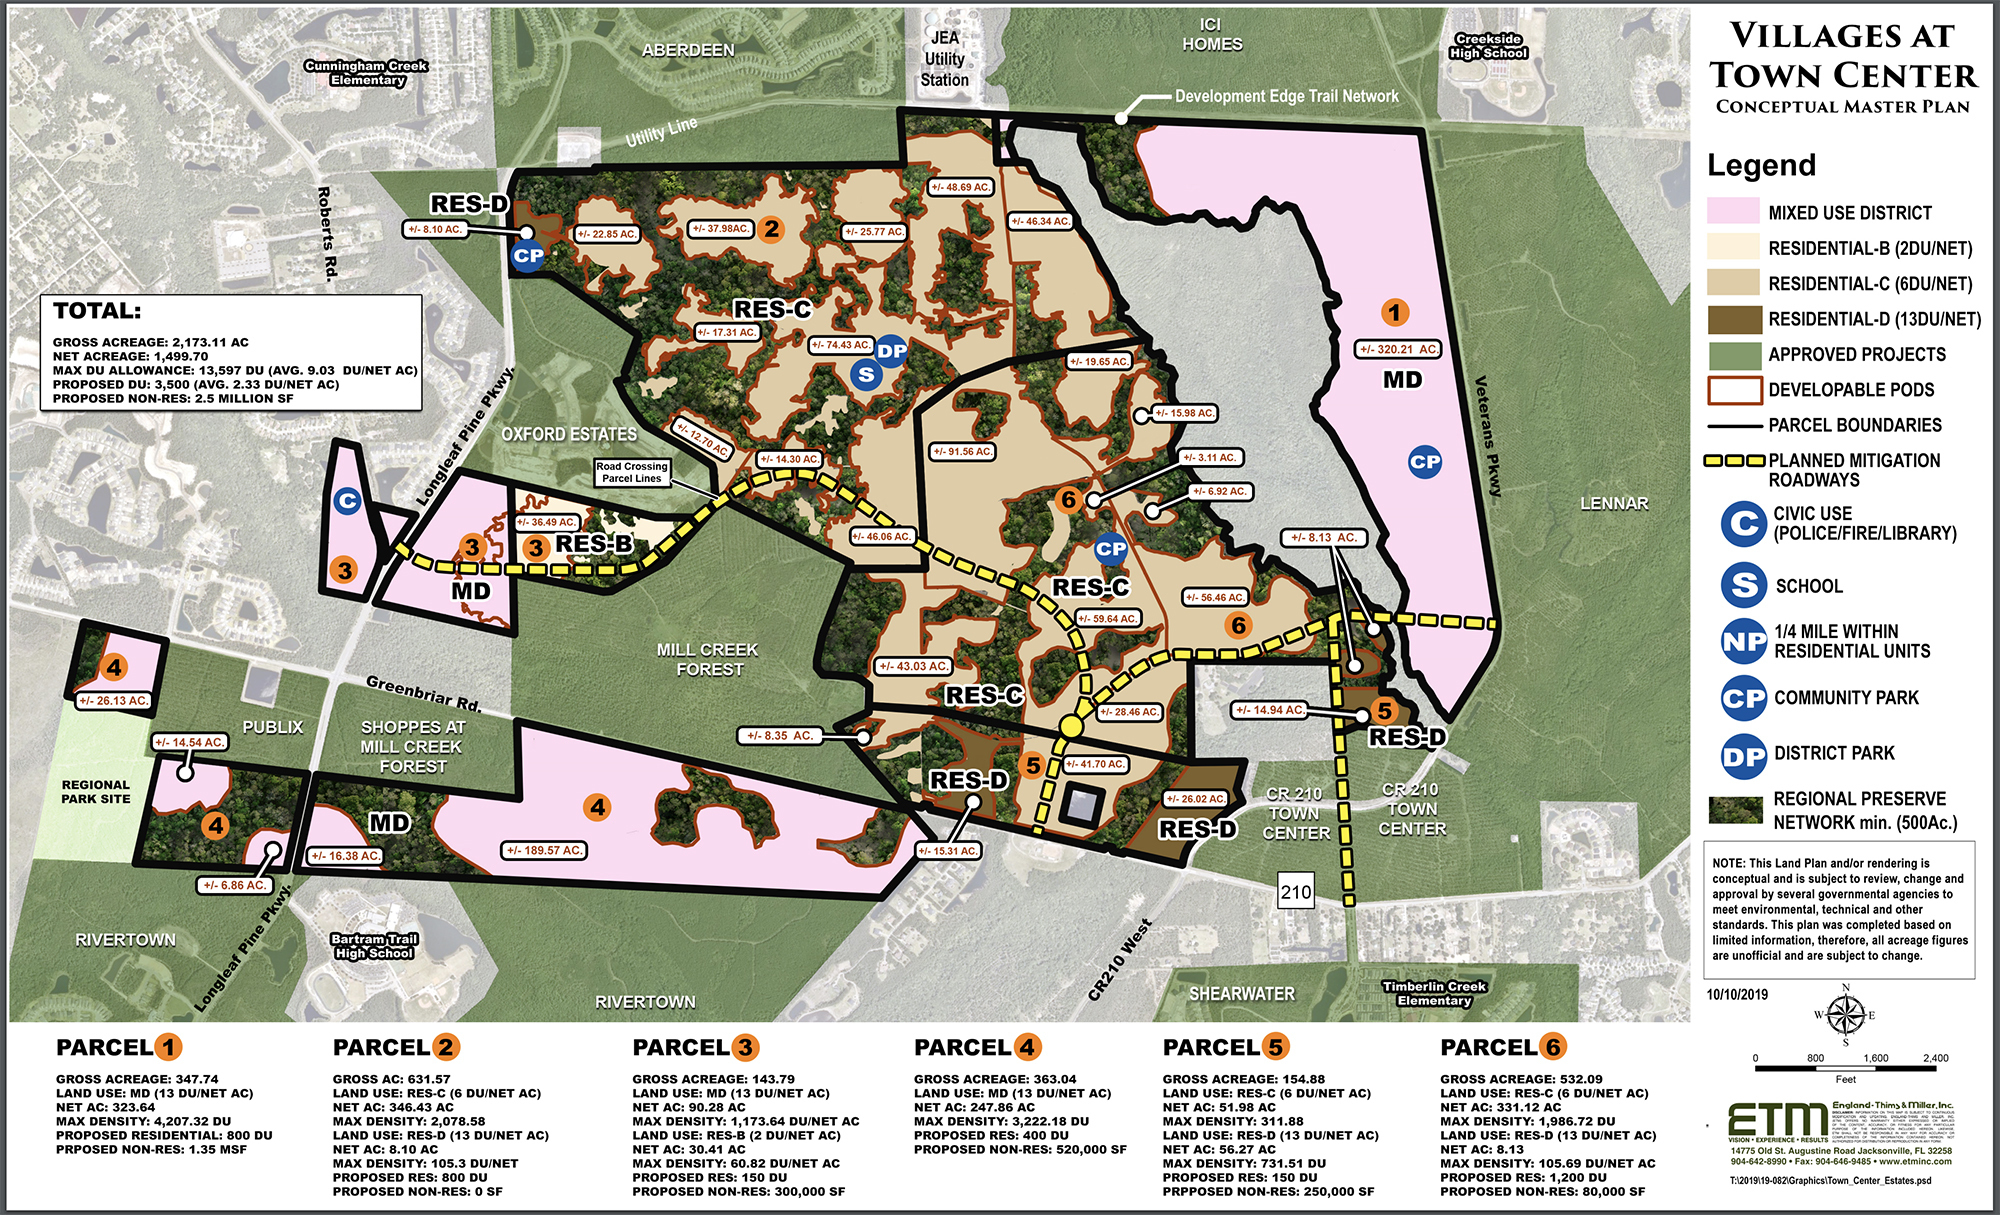 The 2019 master plan for the Villages at Town Center.